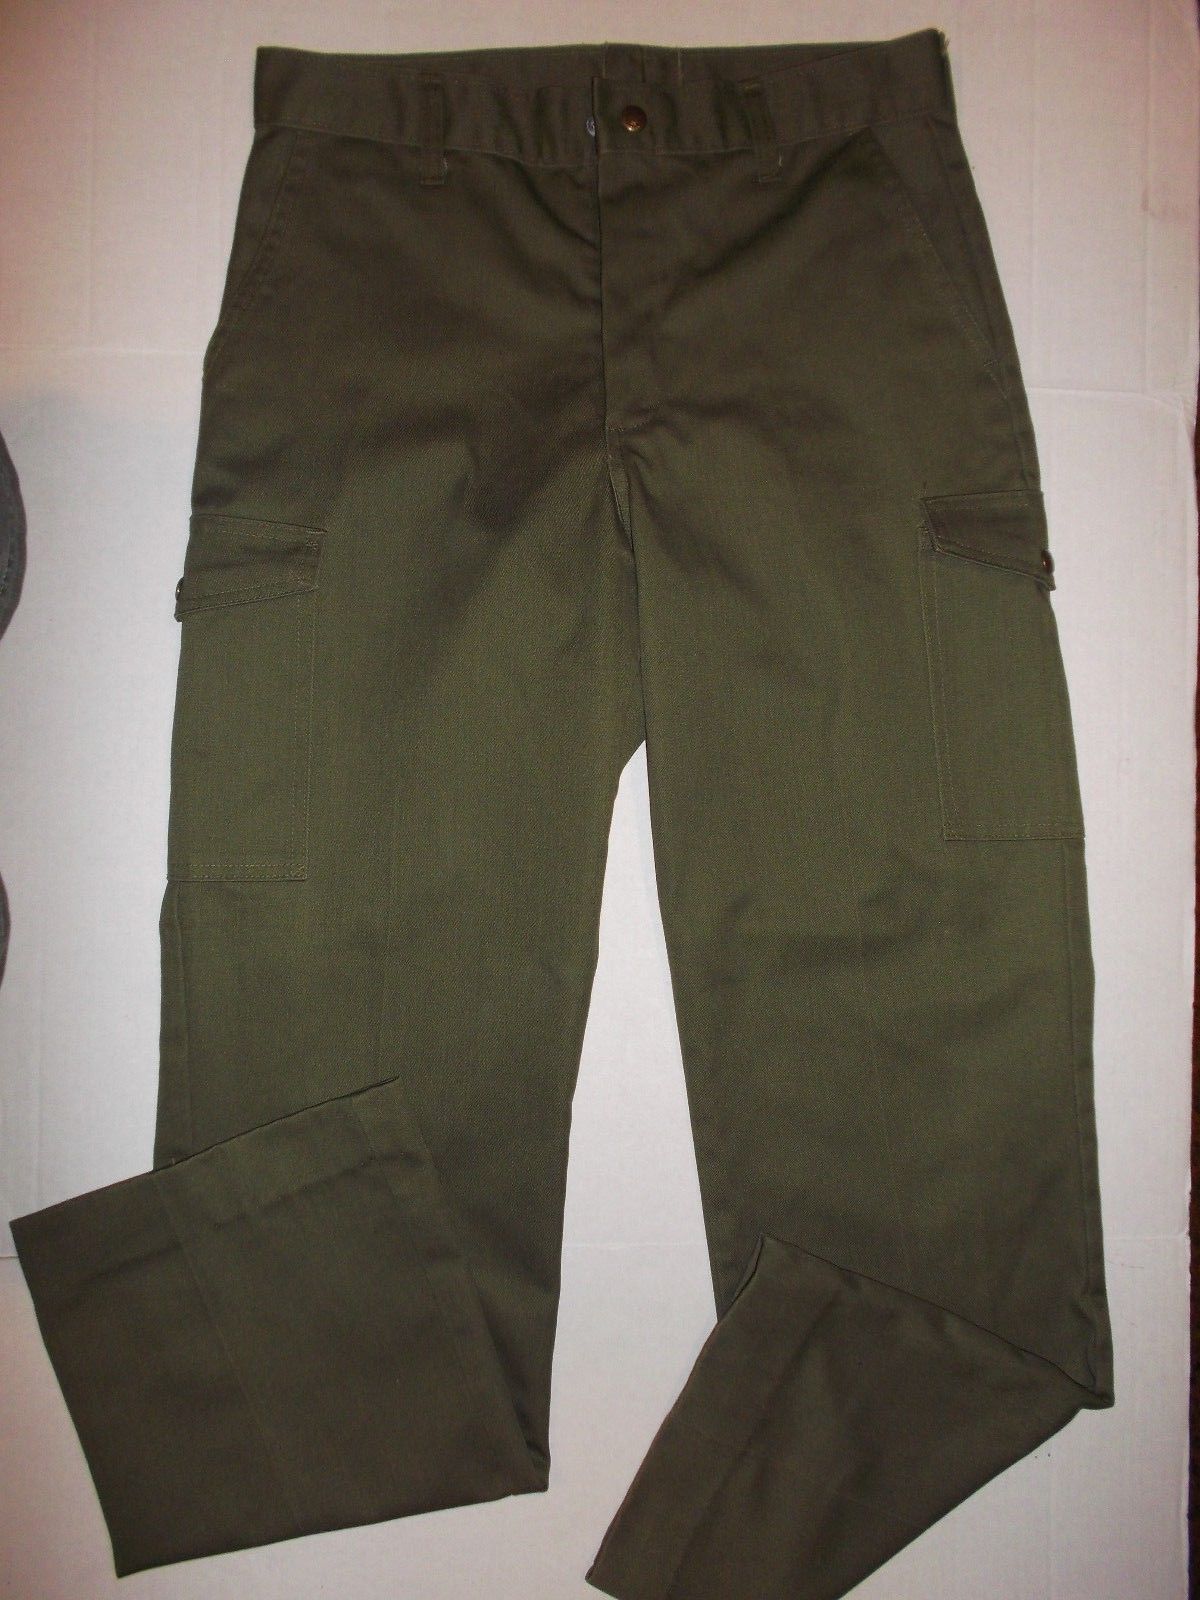 OFFICIAL BSA BOY SCOUTS OF AMERICA USED MENS SMALL 31 UNIFORM PANTS ...